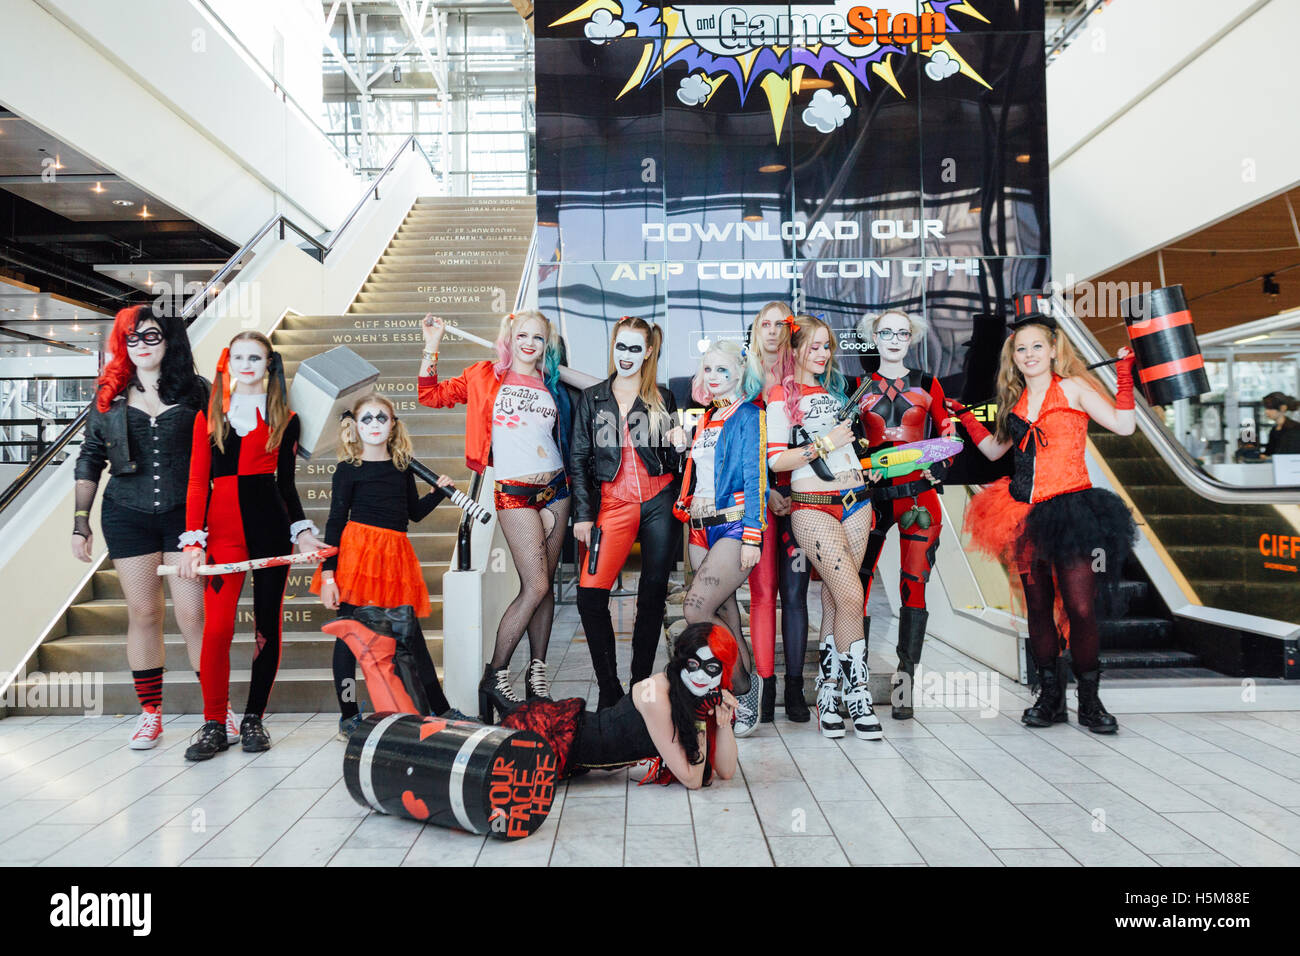 A group of cosplayers wear Harley Quinn costumes, known from the DC Comics-universe, at Comic Con Copenhagen 2016. Stock Photo